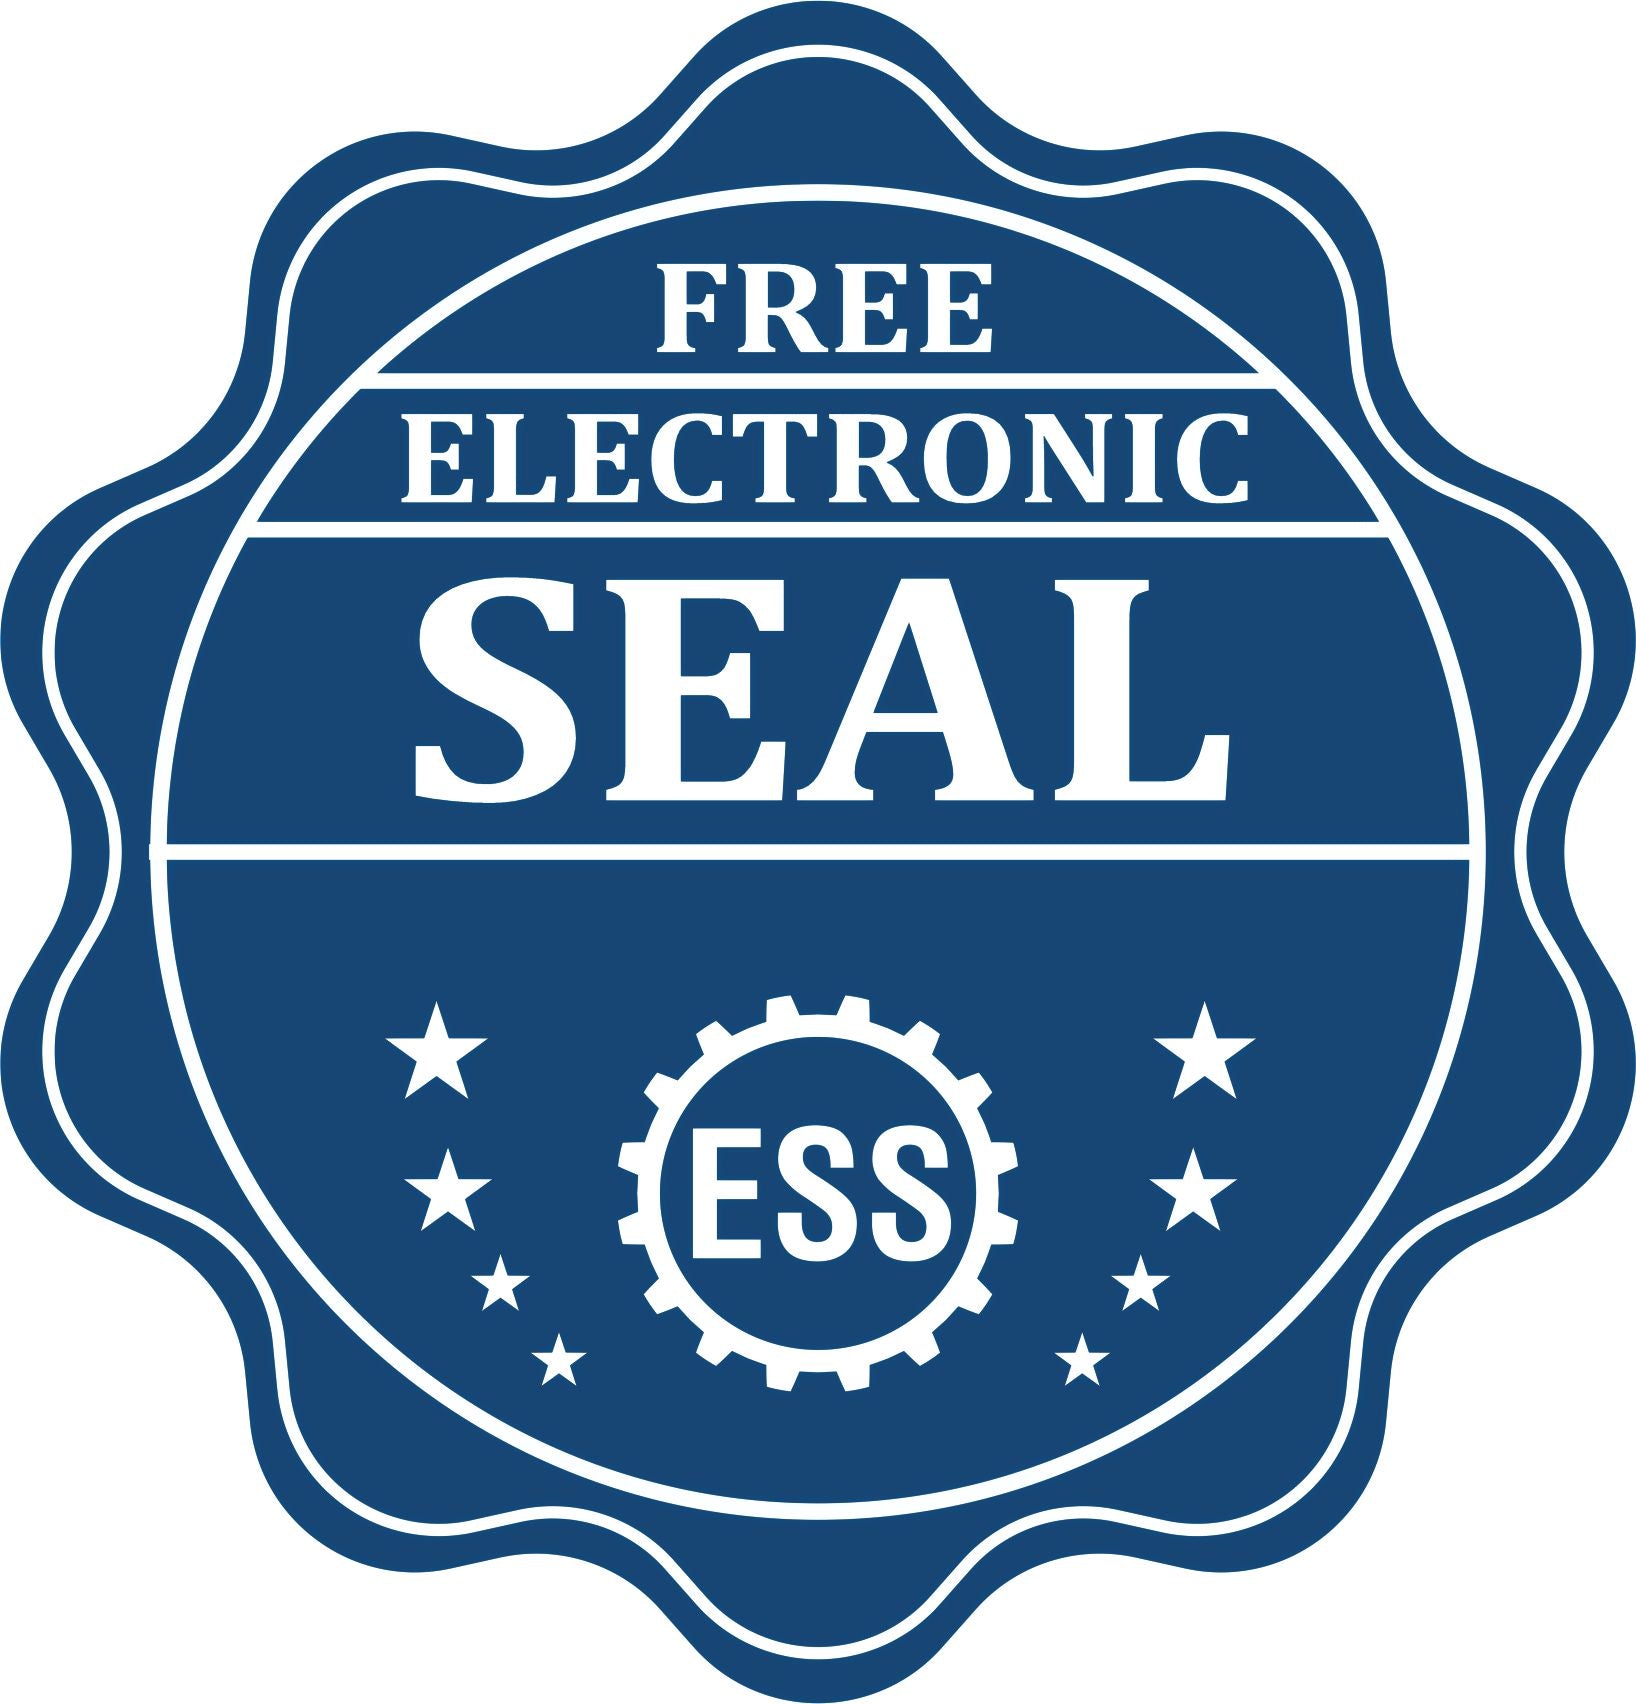 A badge showing a free electronic seal for the Premium MaxLight Pre-Inked Indiana Landscape Architectural Stamp with stars and the ESS gear on the emblem.